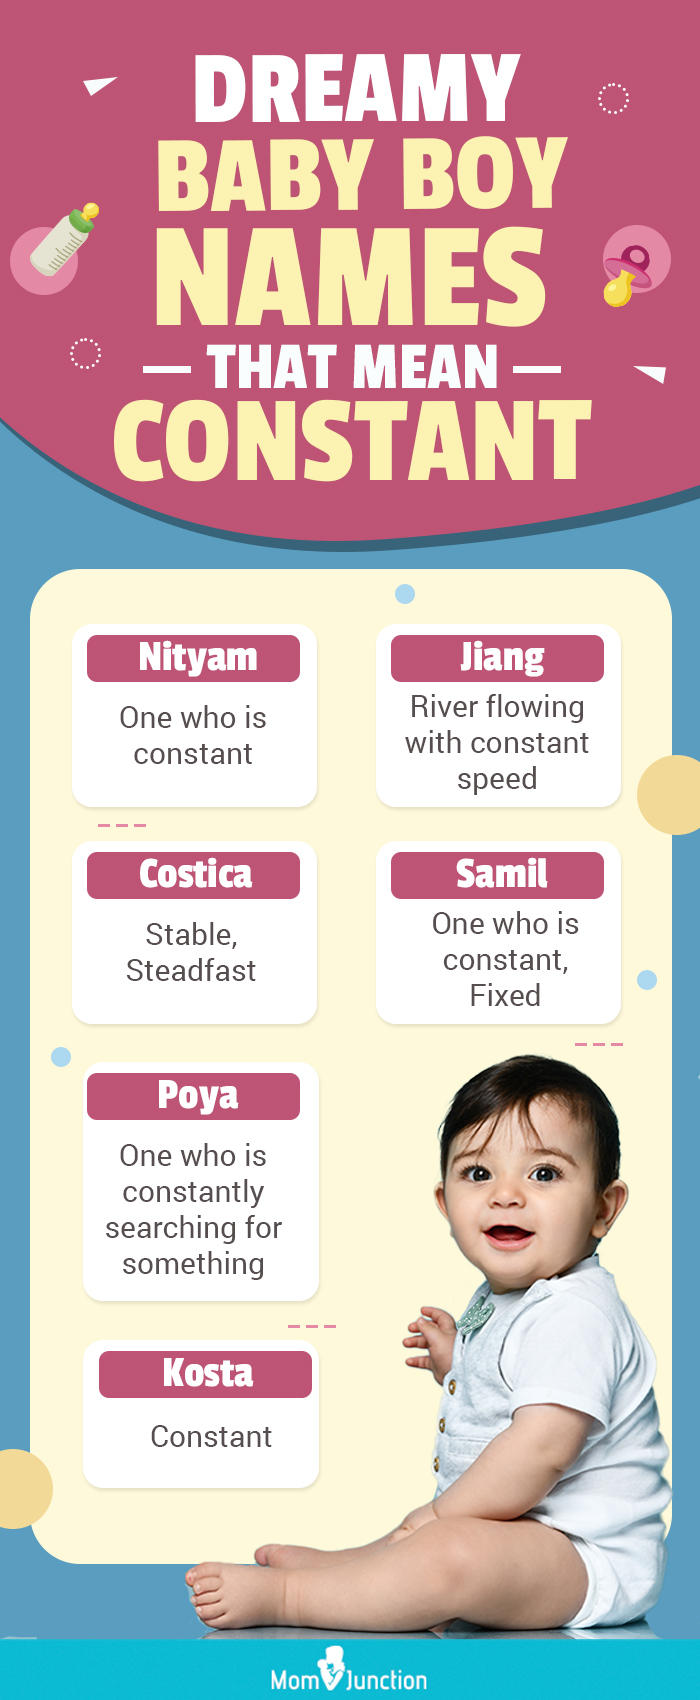 Dreamy Baby Boy Names That Mean Constant(infographic)